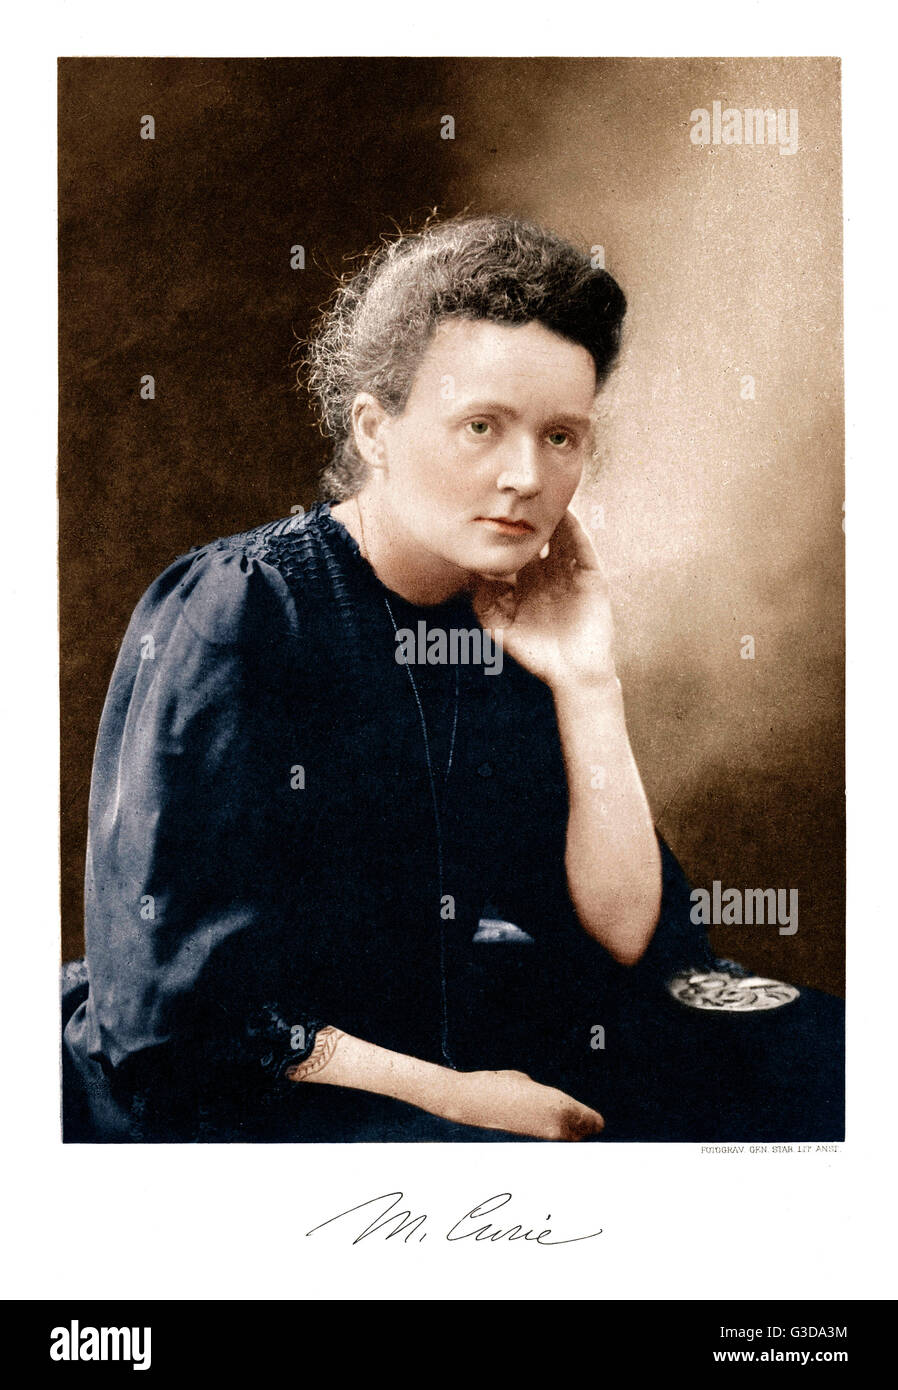 Marie Curie (1867-1934) - Polish Scientist, twice the recipient of the Nobel Prize for her pioneering research on radioactivity, the first woman Nobel winner.     Date: 1911 Stock Photo